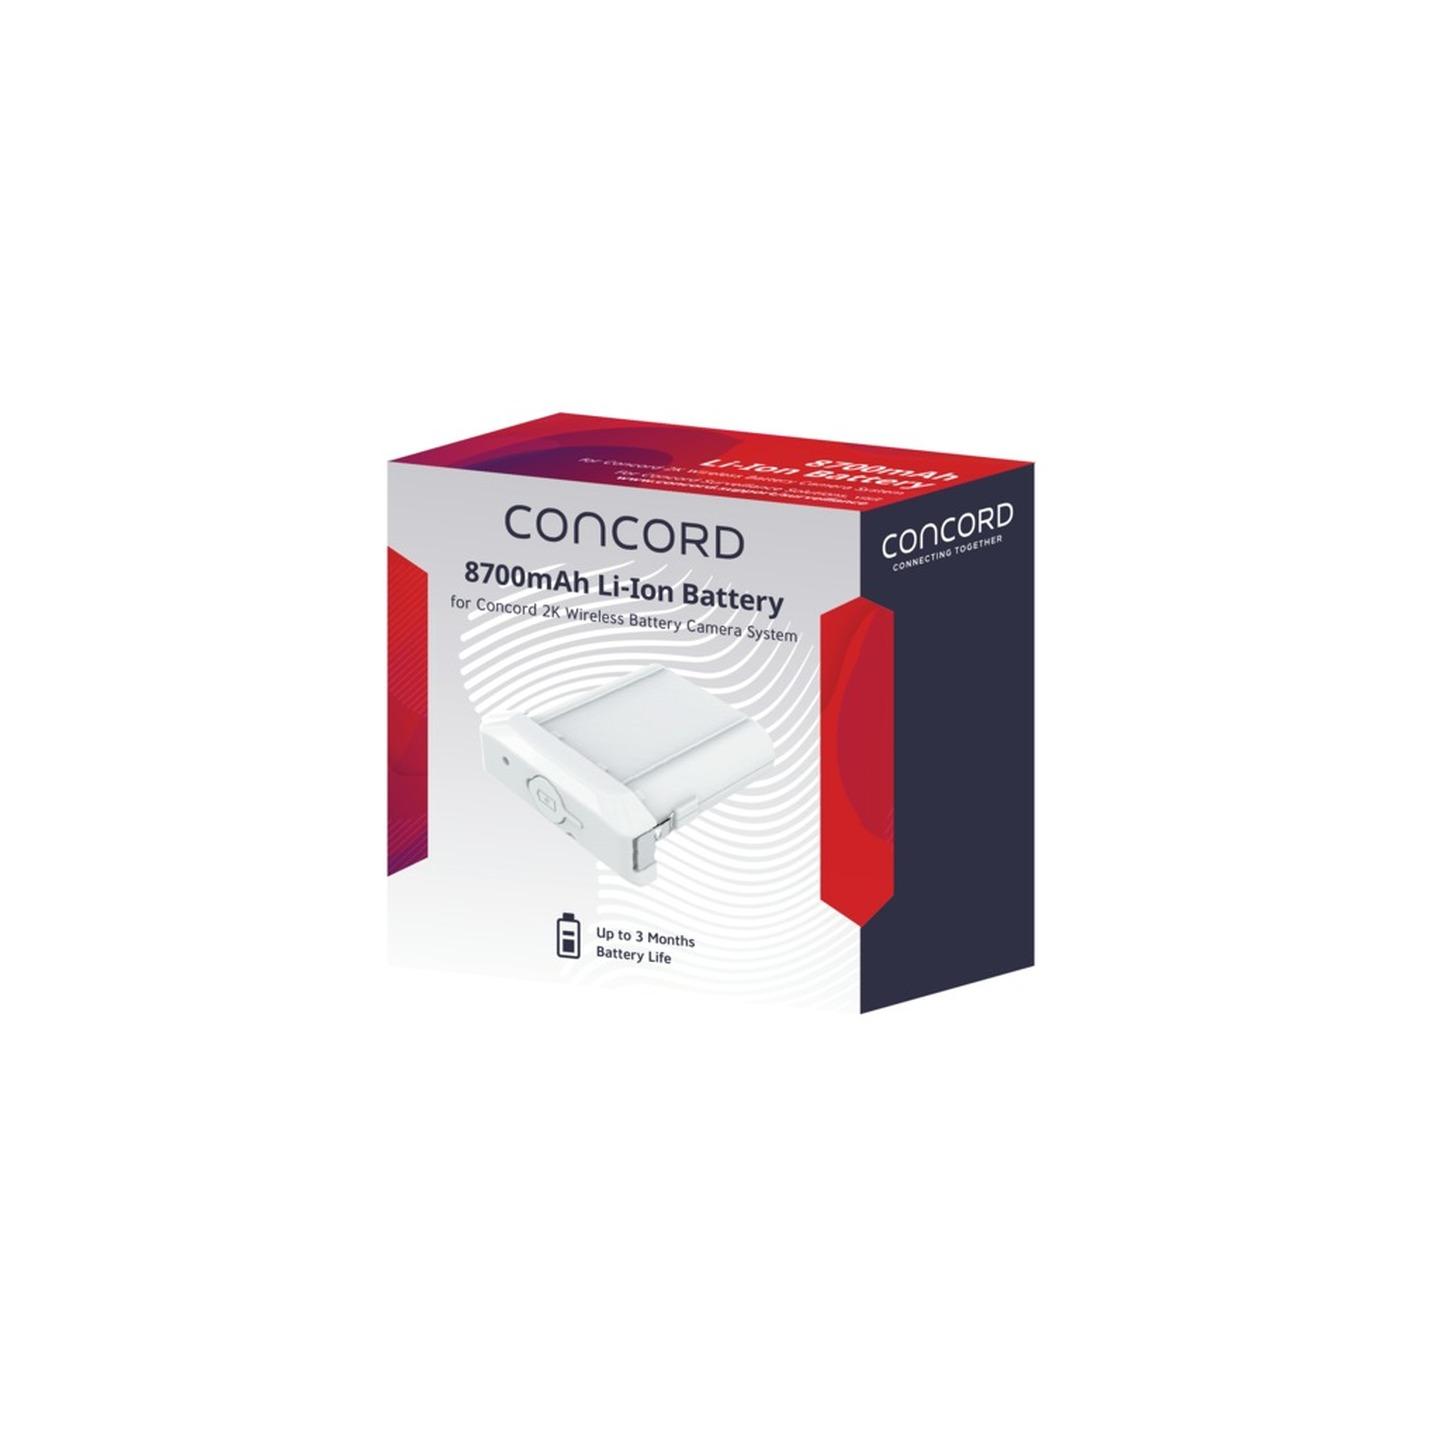 Concord Spare 8700mAh Li-Ion Battery for Concord 2K Wireless NVR System